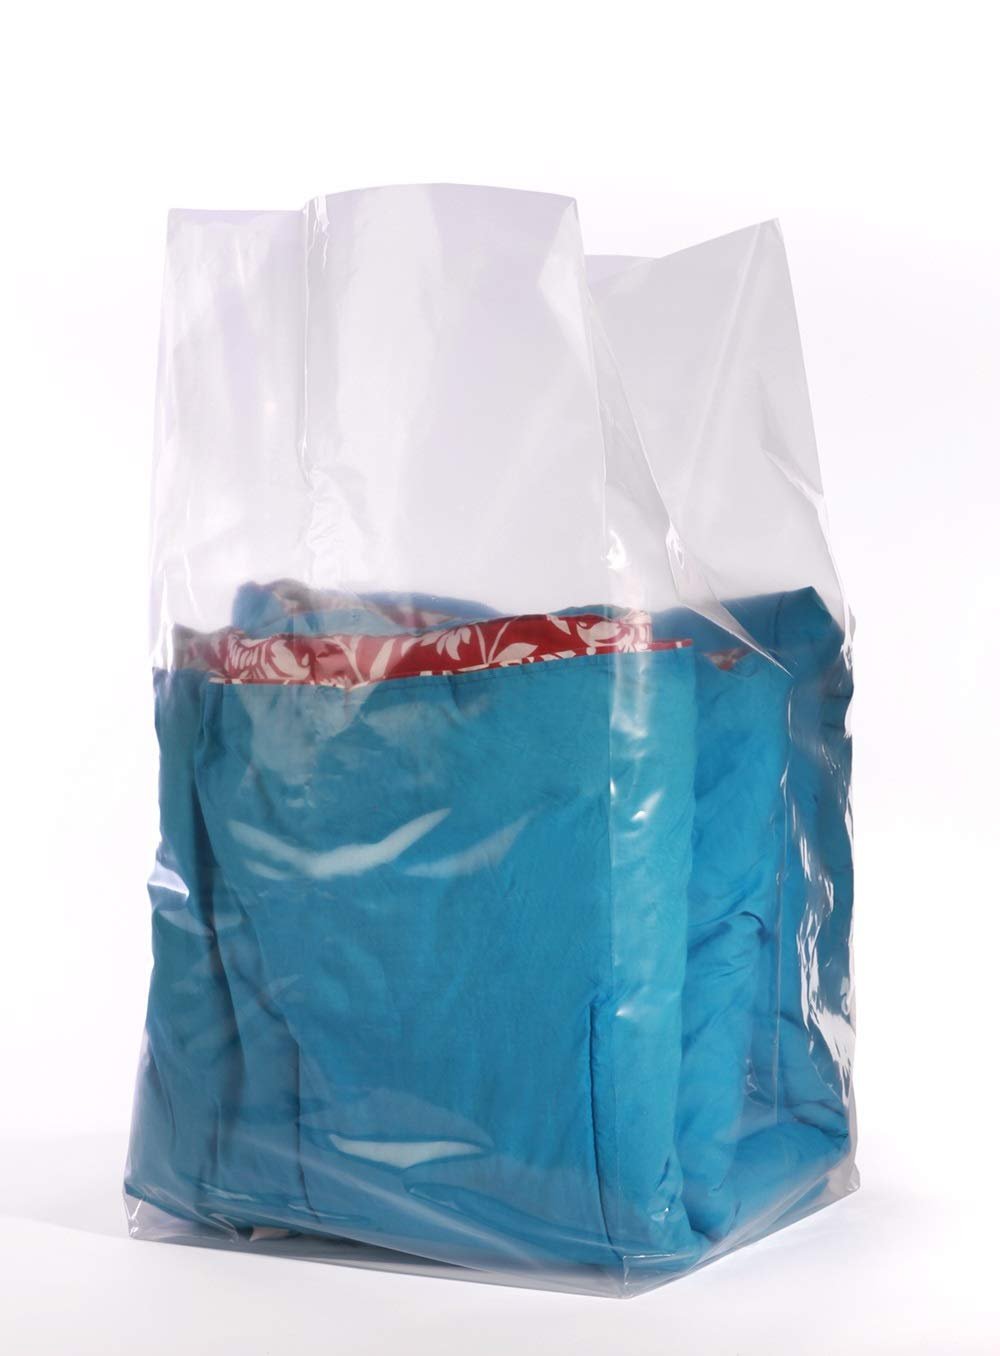 Extra Large 2 Mil Poly Bags - 2 Mil Flat Poly Bags - Poly Bags